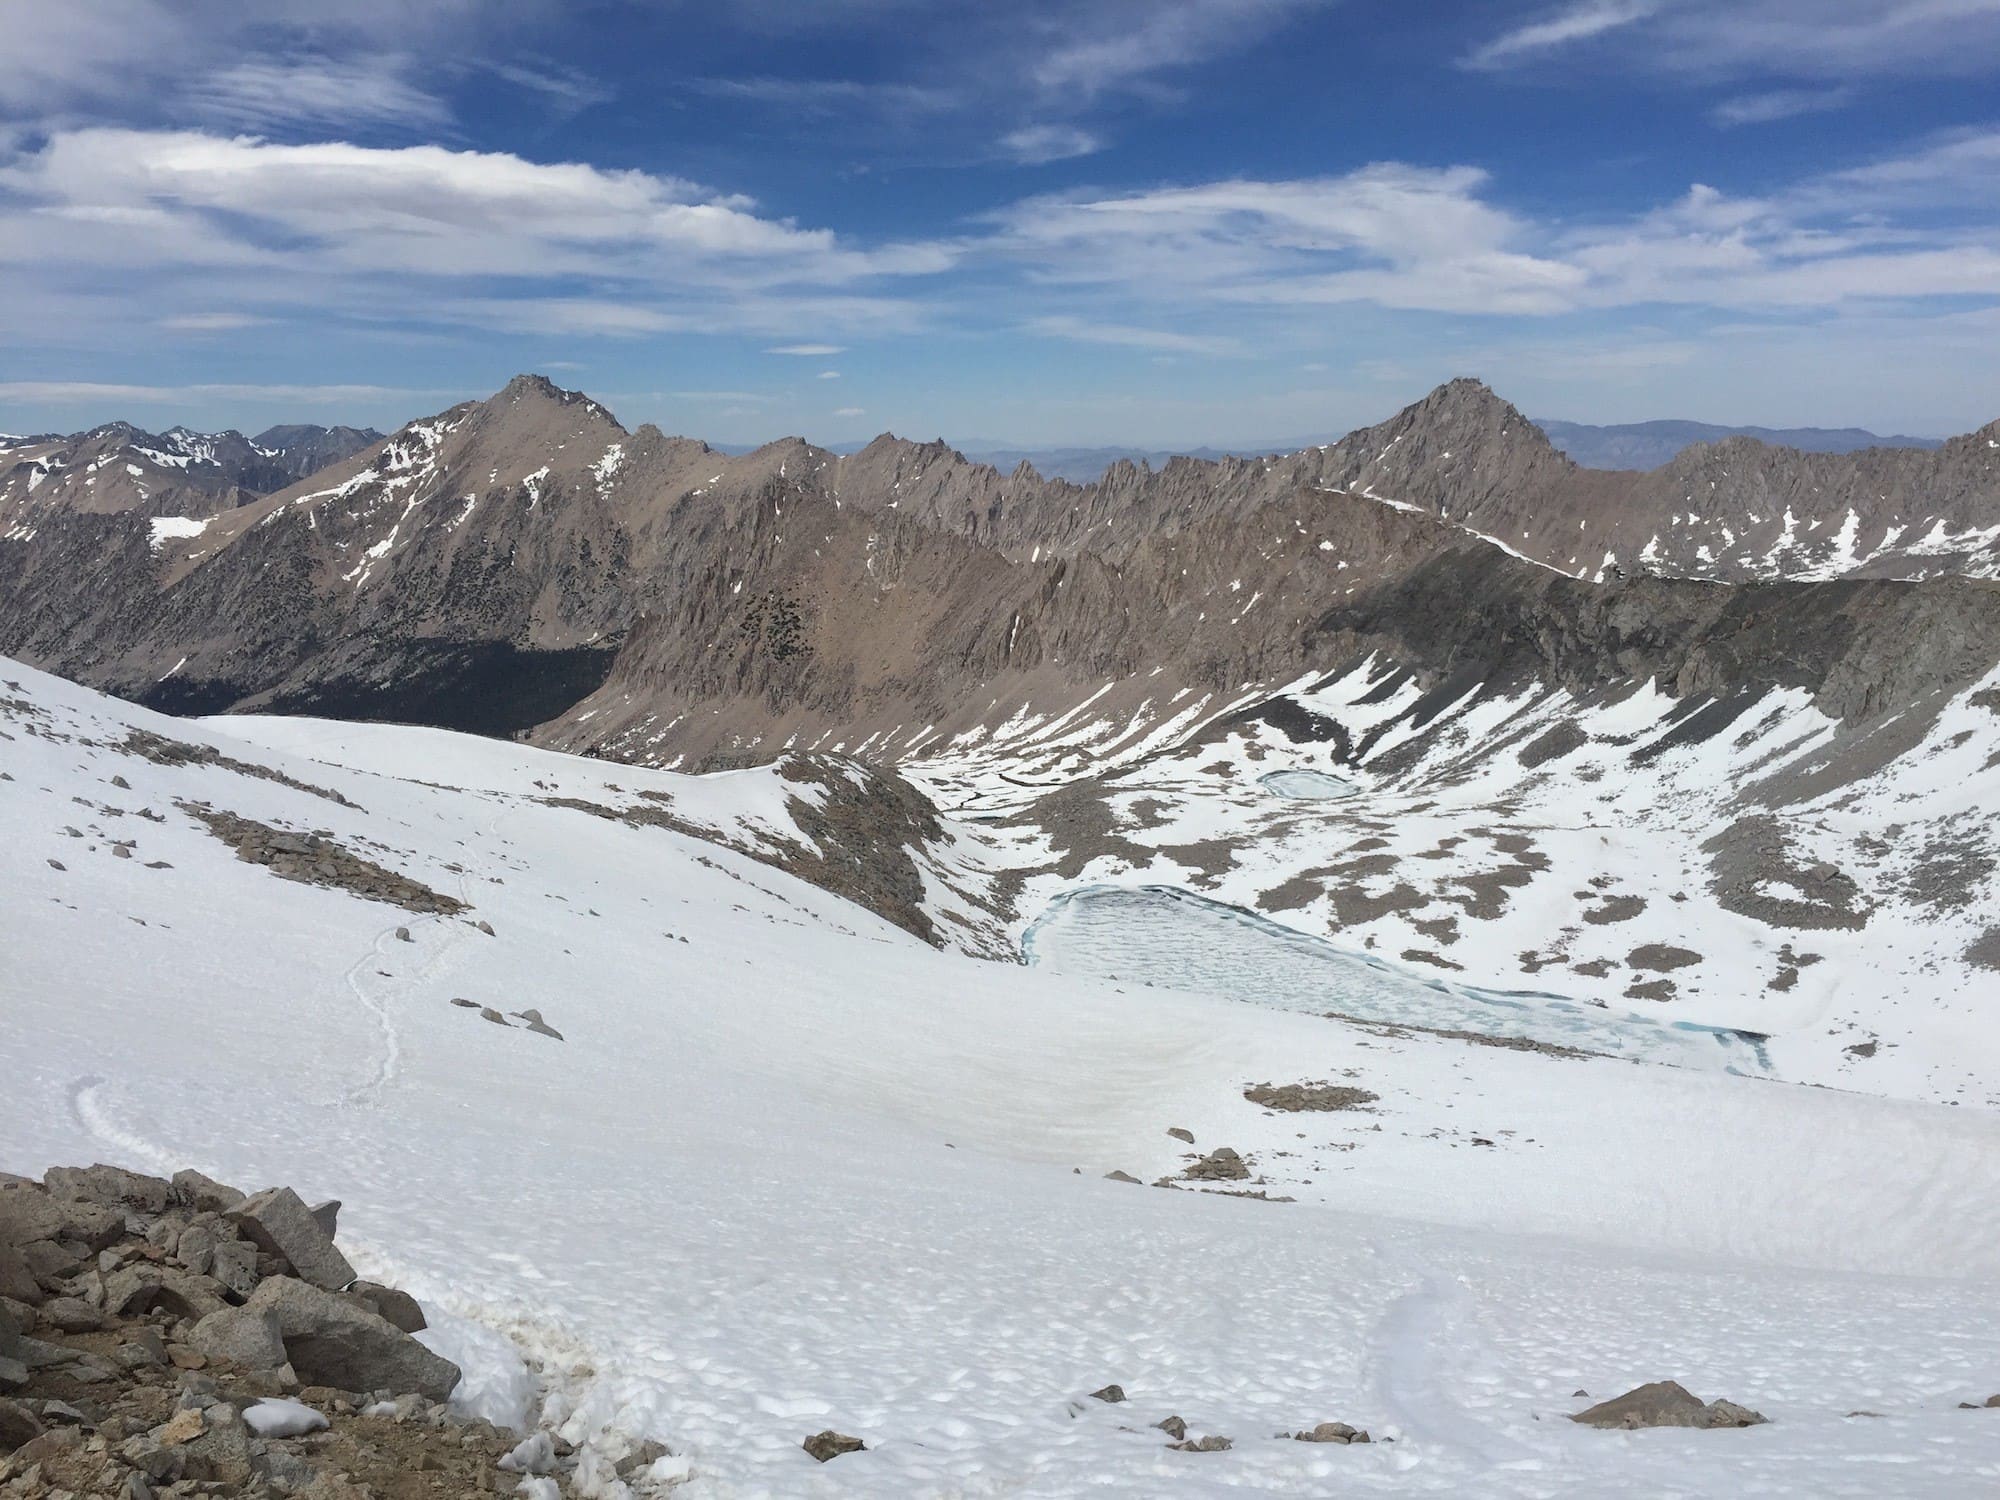 Thinking about thru-hiking the PCT? Check out these 20 Pacific Crest Trail photos and the story behind them from a girl who solo-hiked the PCT.